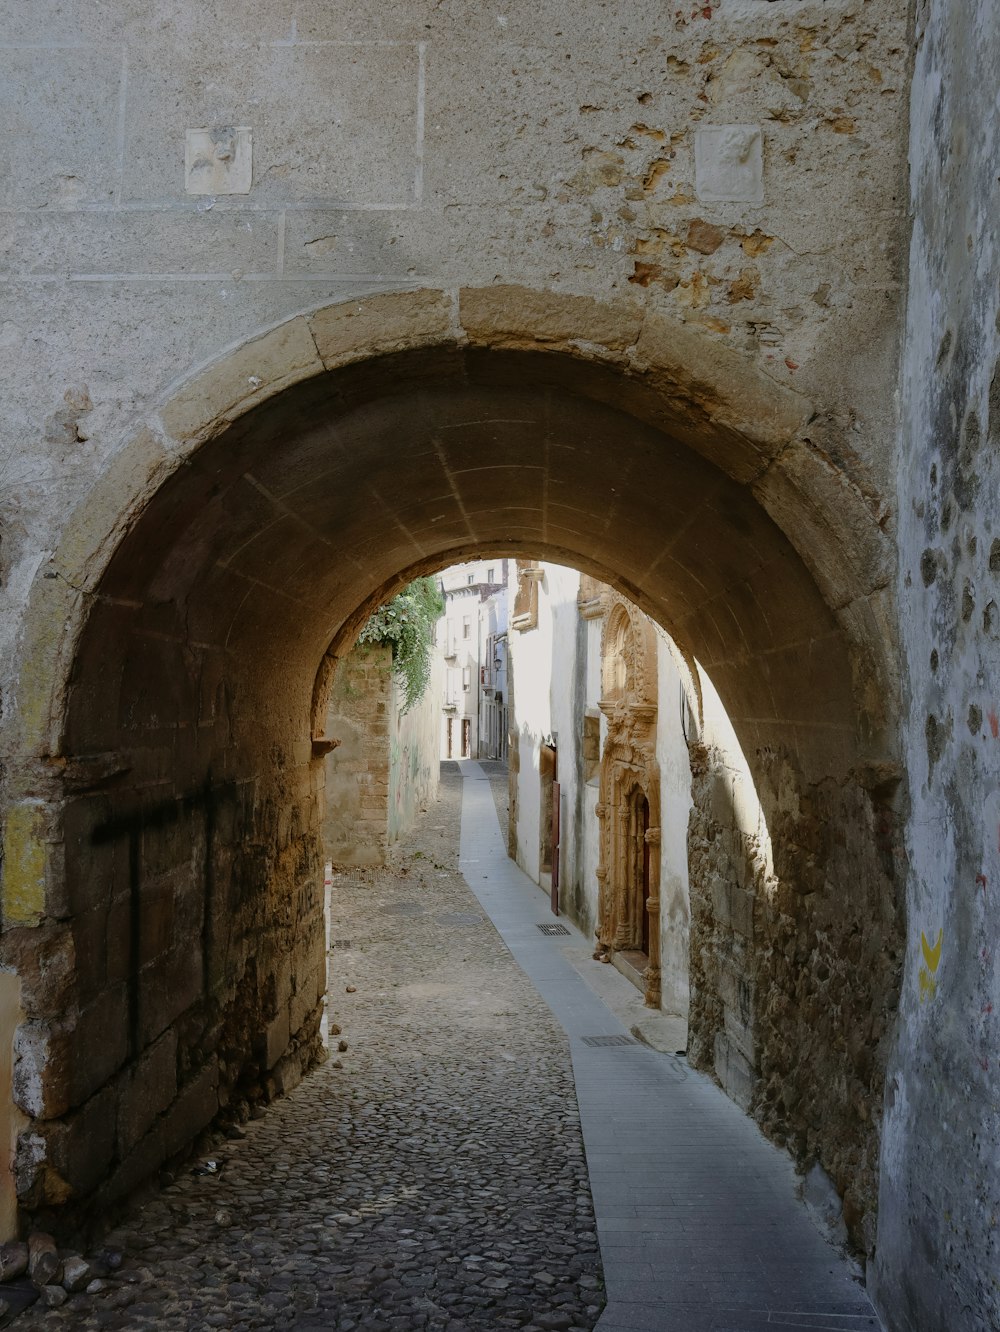 a stone walkway with arched supports